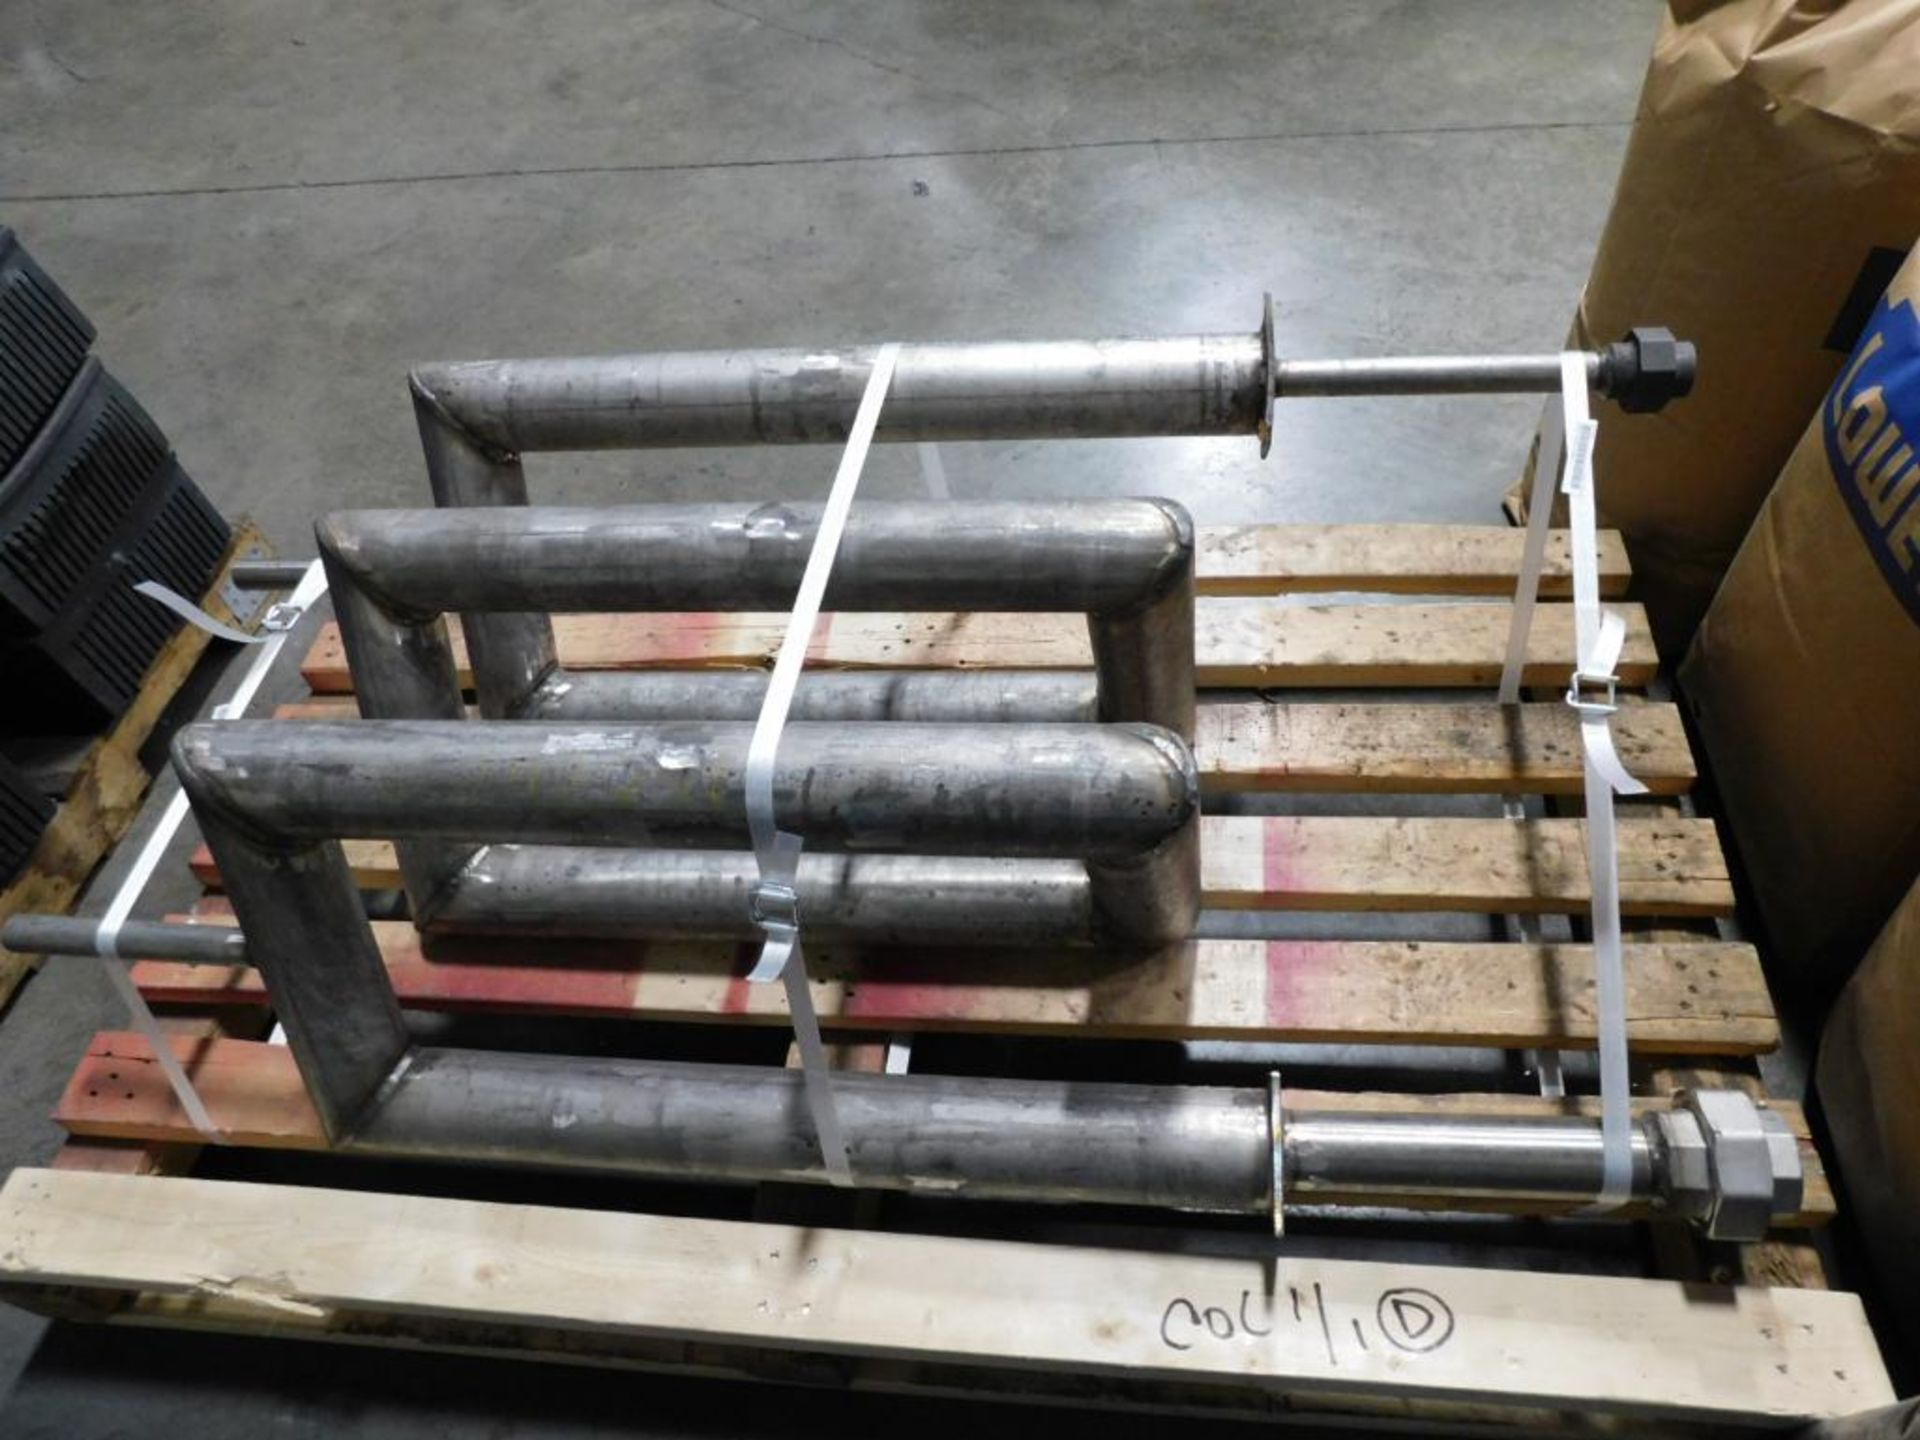 New Retort for CI Hayes Ammonia Dissociator described in Lot 12, Inconel Construction, Recently purc - Image 8 of 9